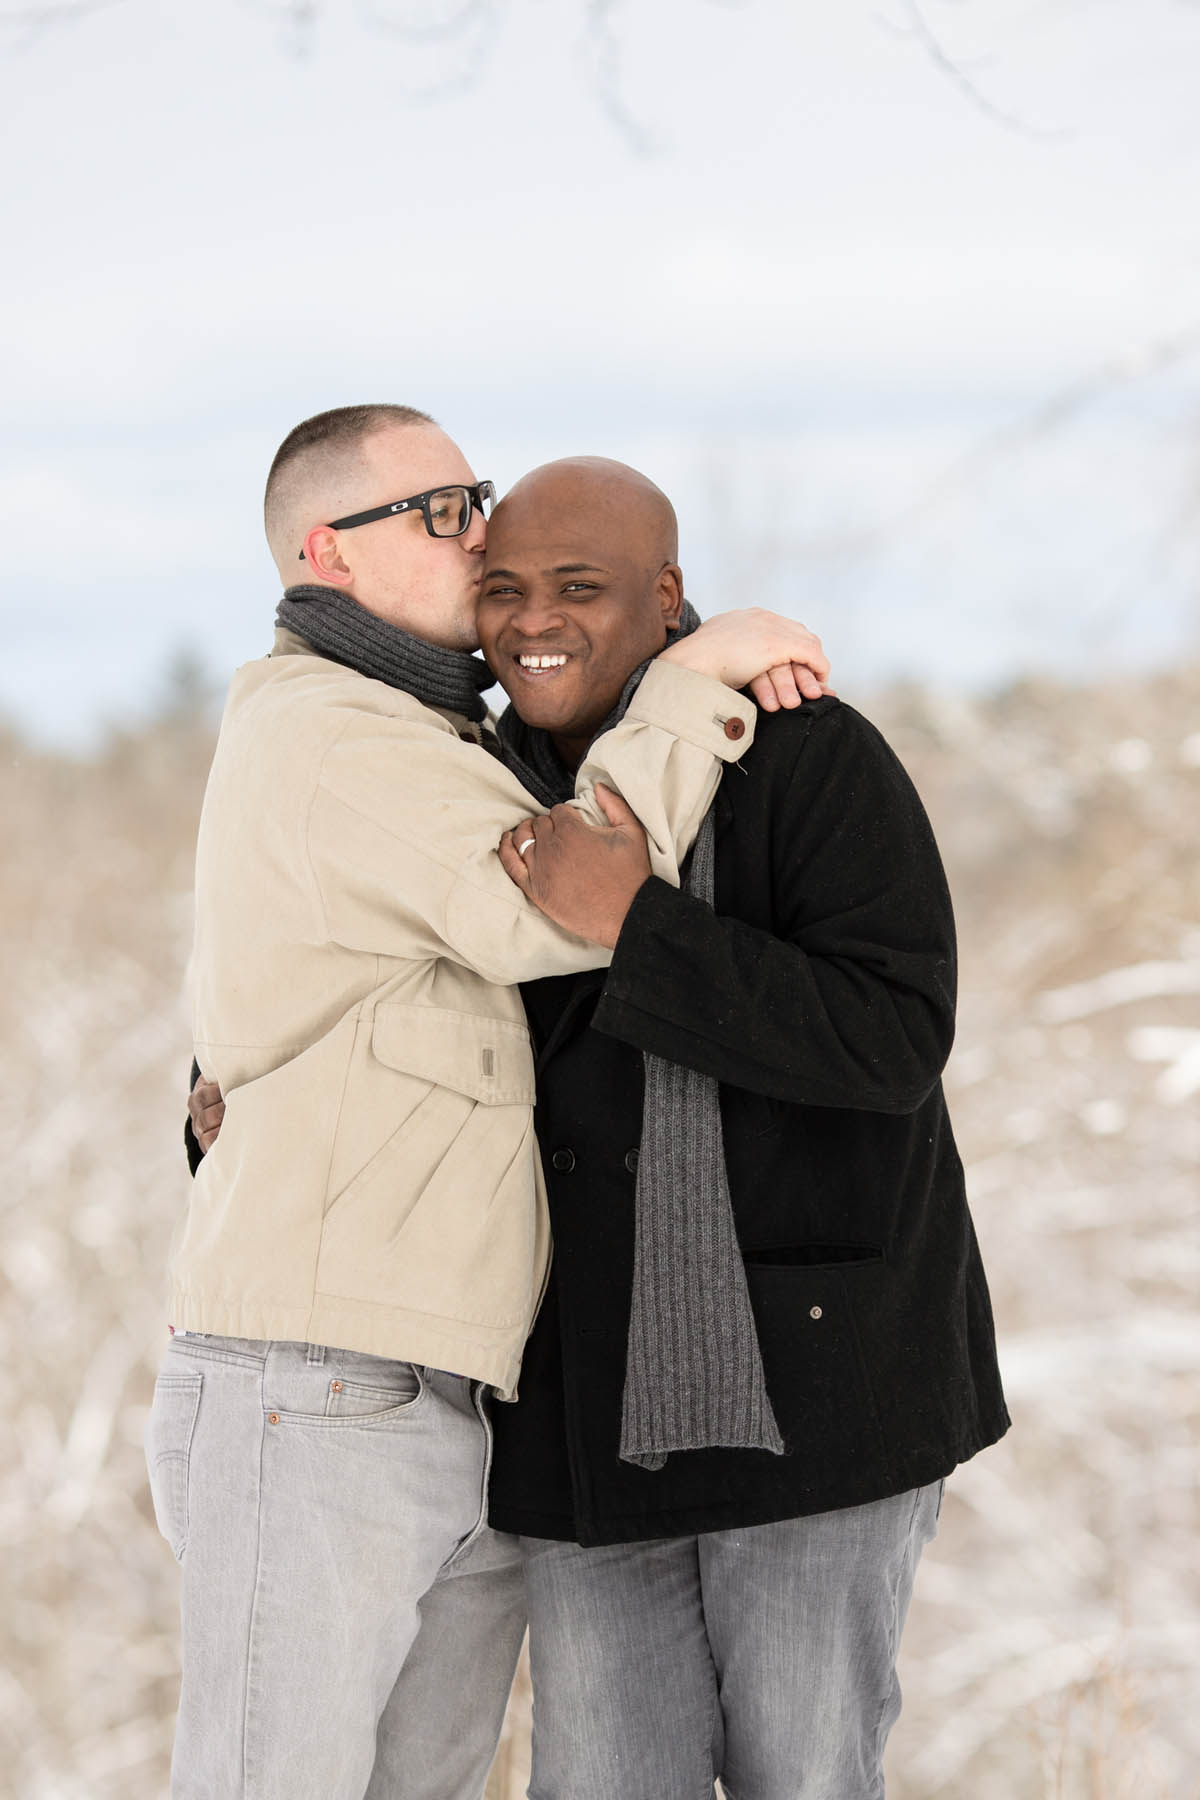 A man in a tan jacket is kissing the head of a man in a black jacket. The man on the right is smiling at the camera.